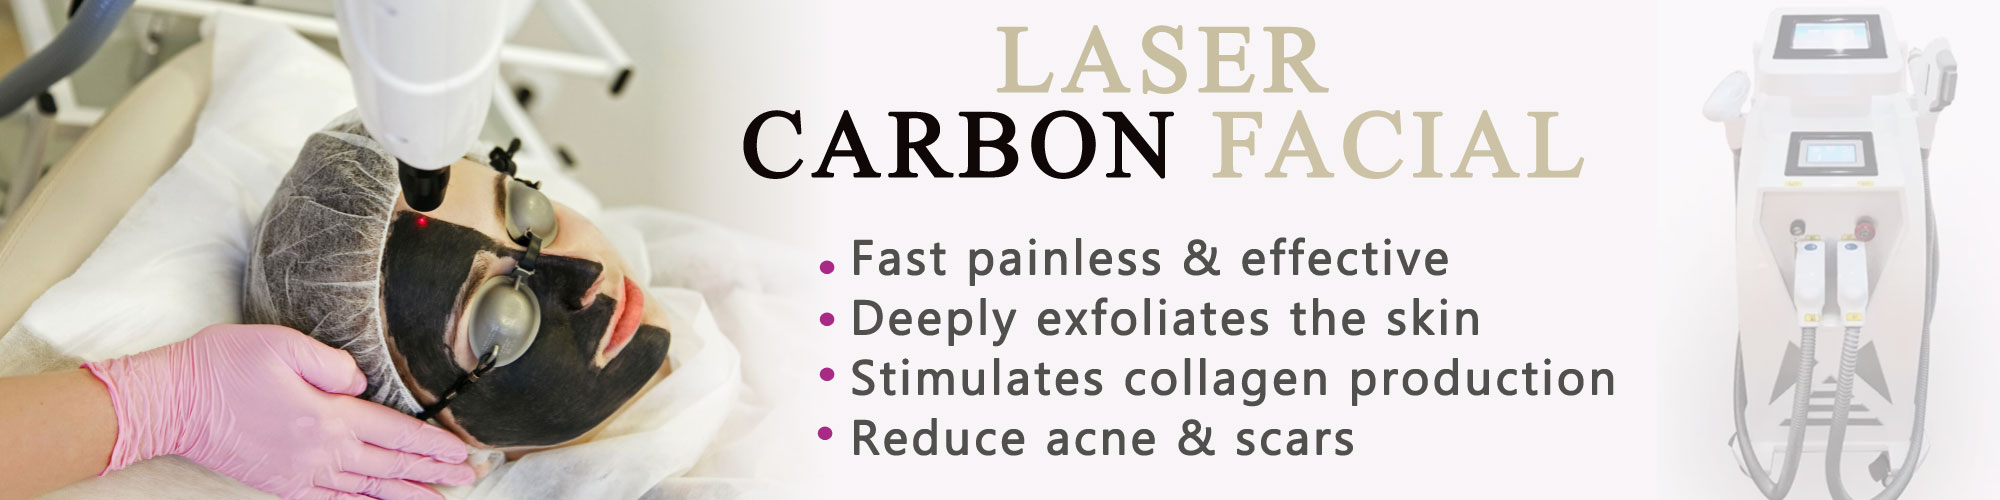 Laser carbon facial treatment at periwinkle skin clinic